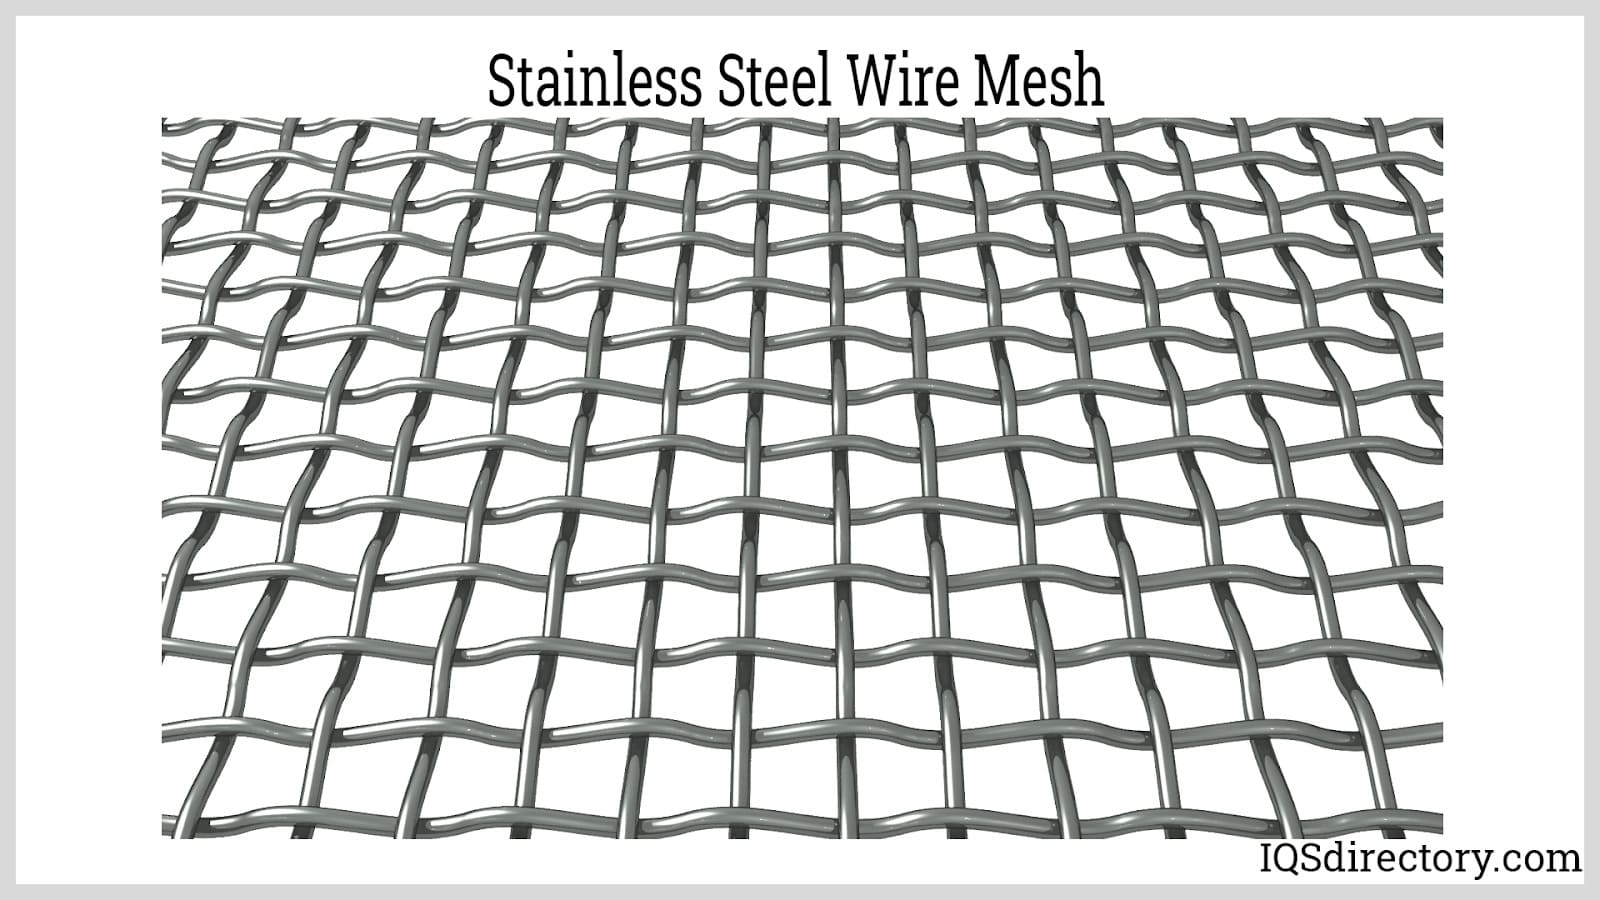 A piece of plastic mesh with small square meshes on gray background.